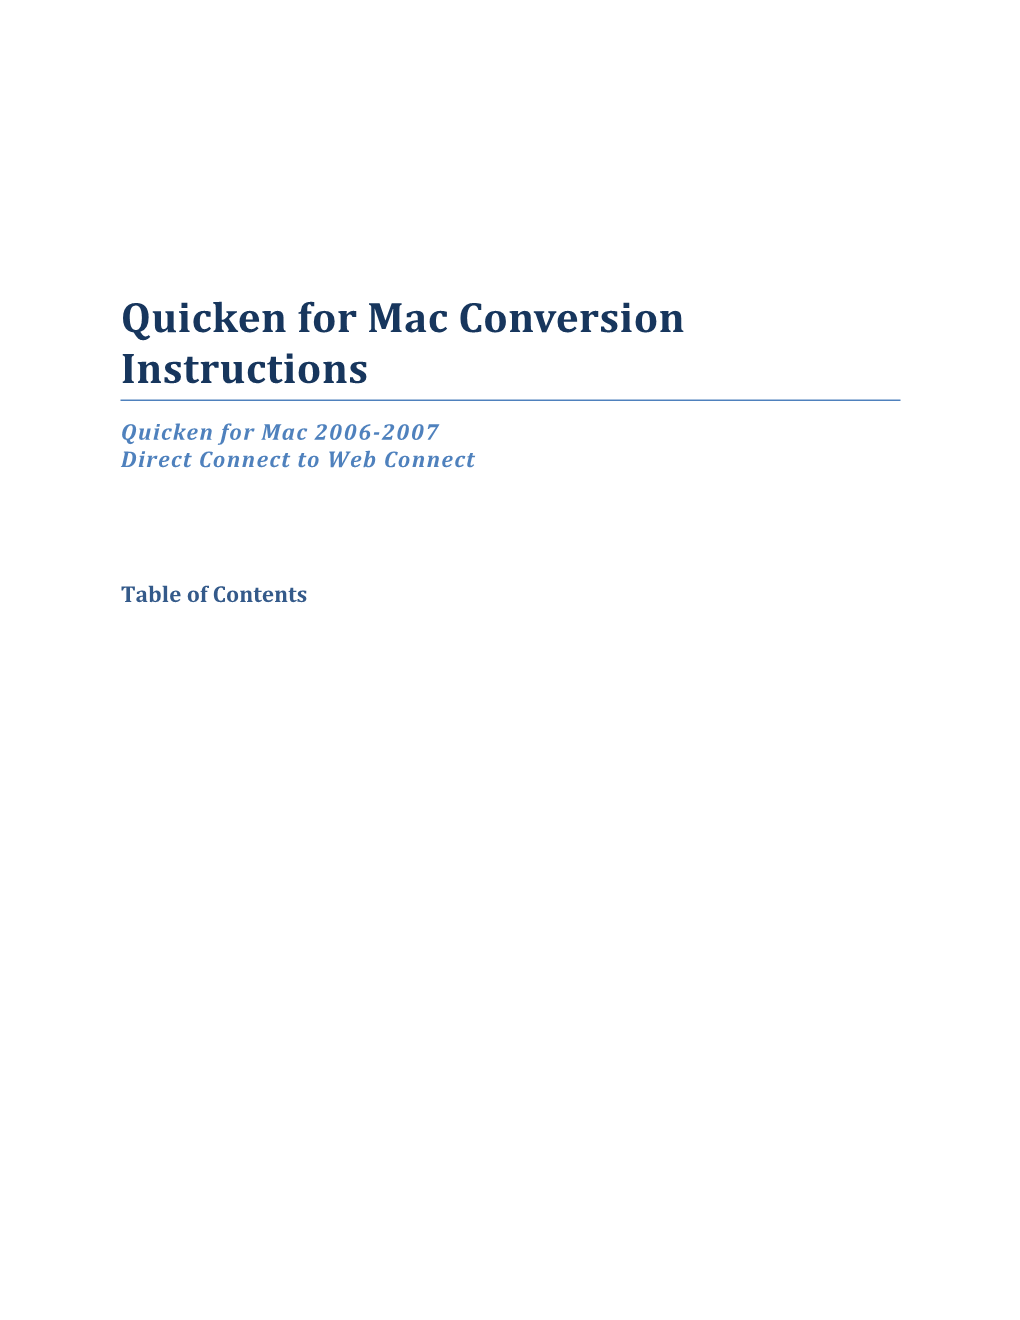 Quicken for Mac Conversion Instructions